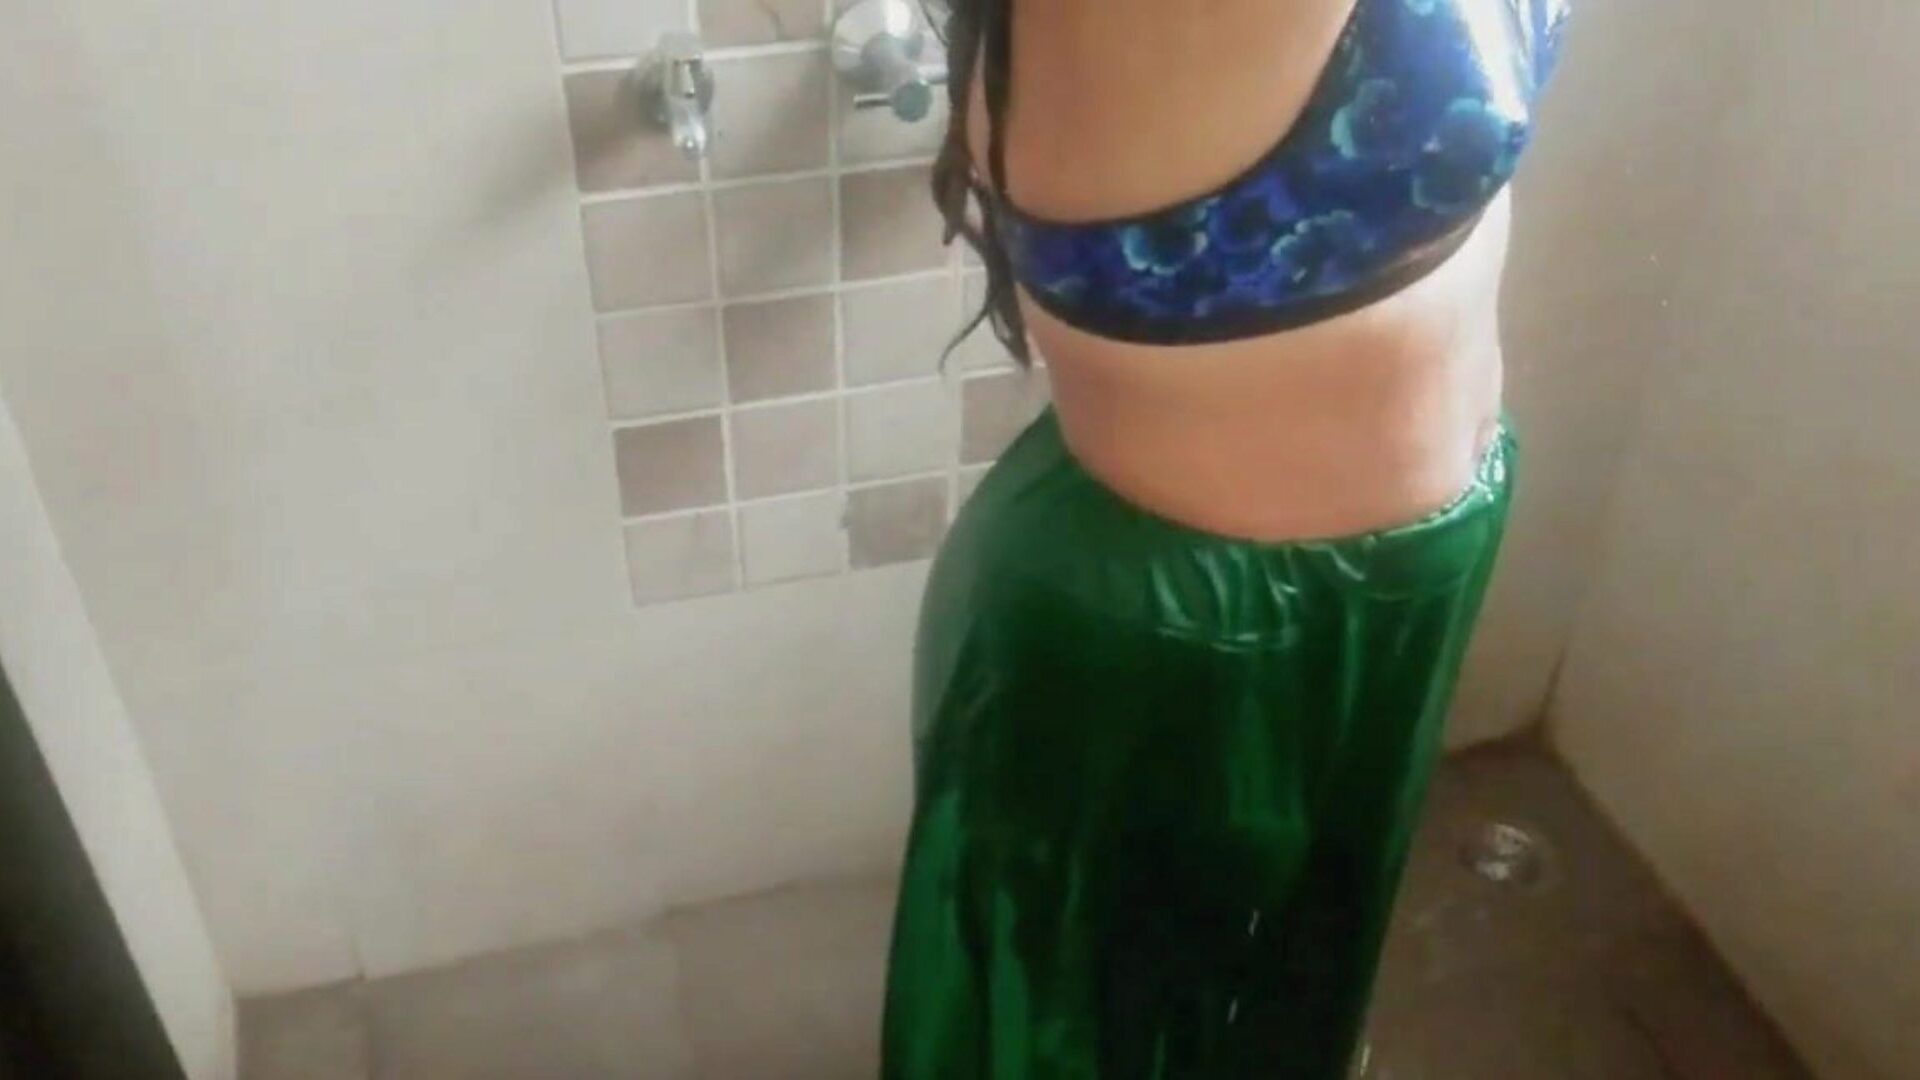 Indian Stepmom Bathroom Sex, Free Mature Porn a2: xHamster Watch Indian Stepmom Bathroom Sex movie scene on xHamster, the biggest HD fuck-fest tube web site with tons of free-for-all Asian Mature & Redtube Free Sex porno videos